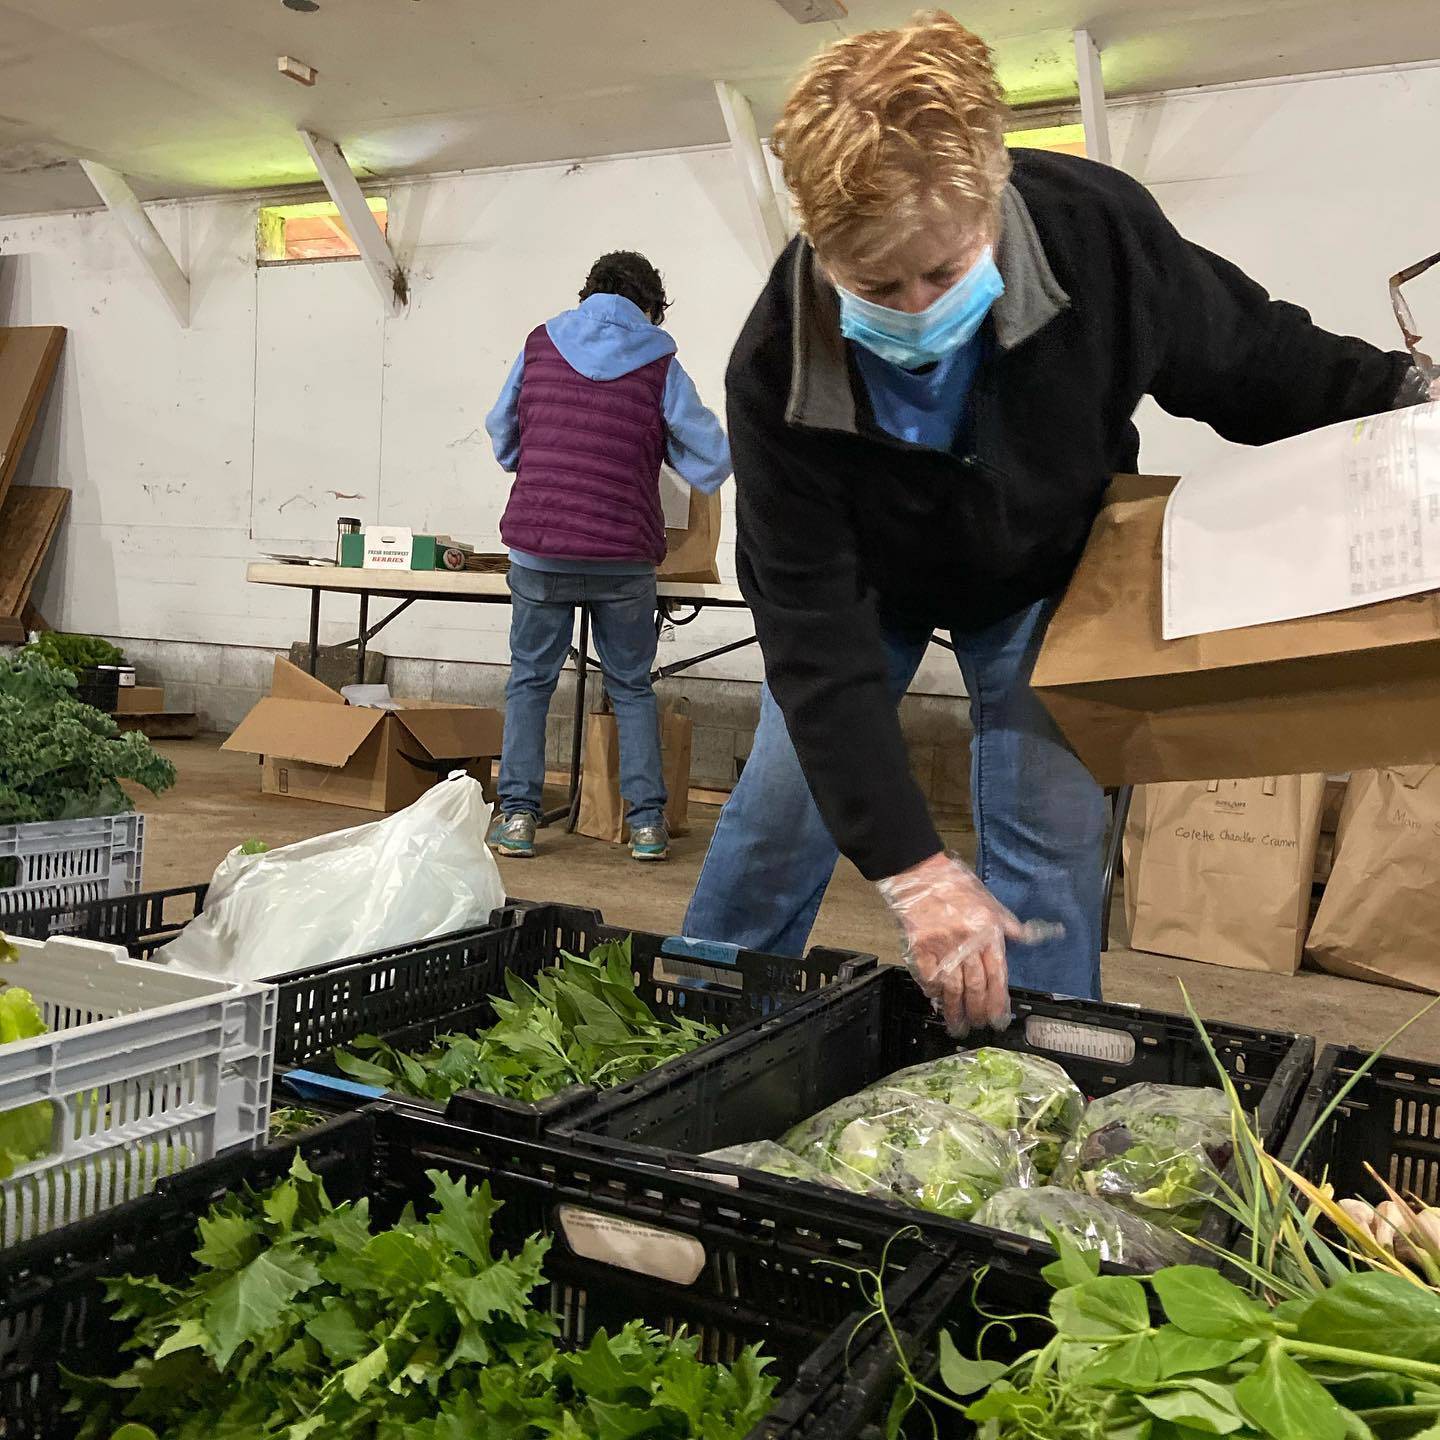 Photo courtesy Whidbey Island Grown Cooperative
The Whidbey Island Grown Cooperative’s online ordering platform, the Food Hub, connected shoppers with local farmers, and now allows businesses to place large orders.